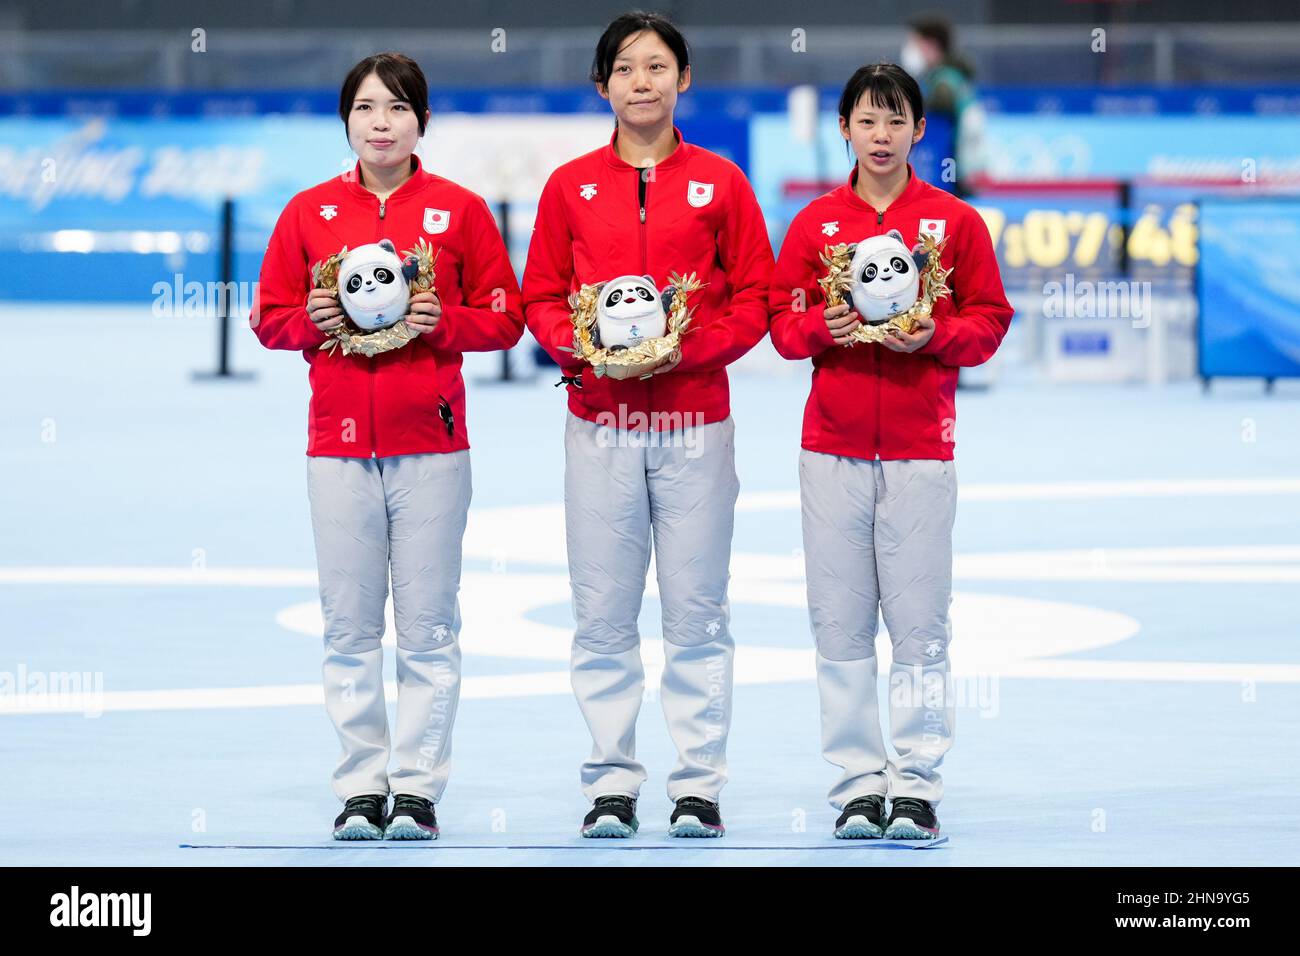 BEIJING, CHINA - FEBRUARY 15: silver medal winners Ayano Sato of Japan, Miho Takagi of Japan, Nana Takagi of Japan competing on the Women's Team Pursuit during the Beijing 2022 Olympic Games at the National Speedskating Oval on February 15, 2022 in Beijing, China (Photo by Douwe Bijlsma/Orange Pictures) NOCNSF Stock Photo